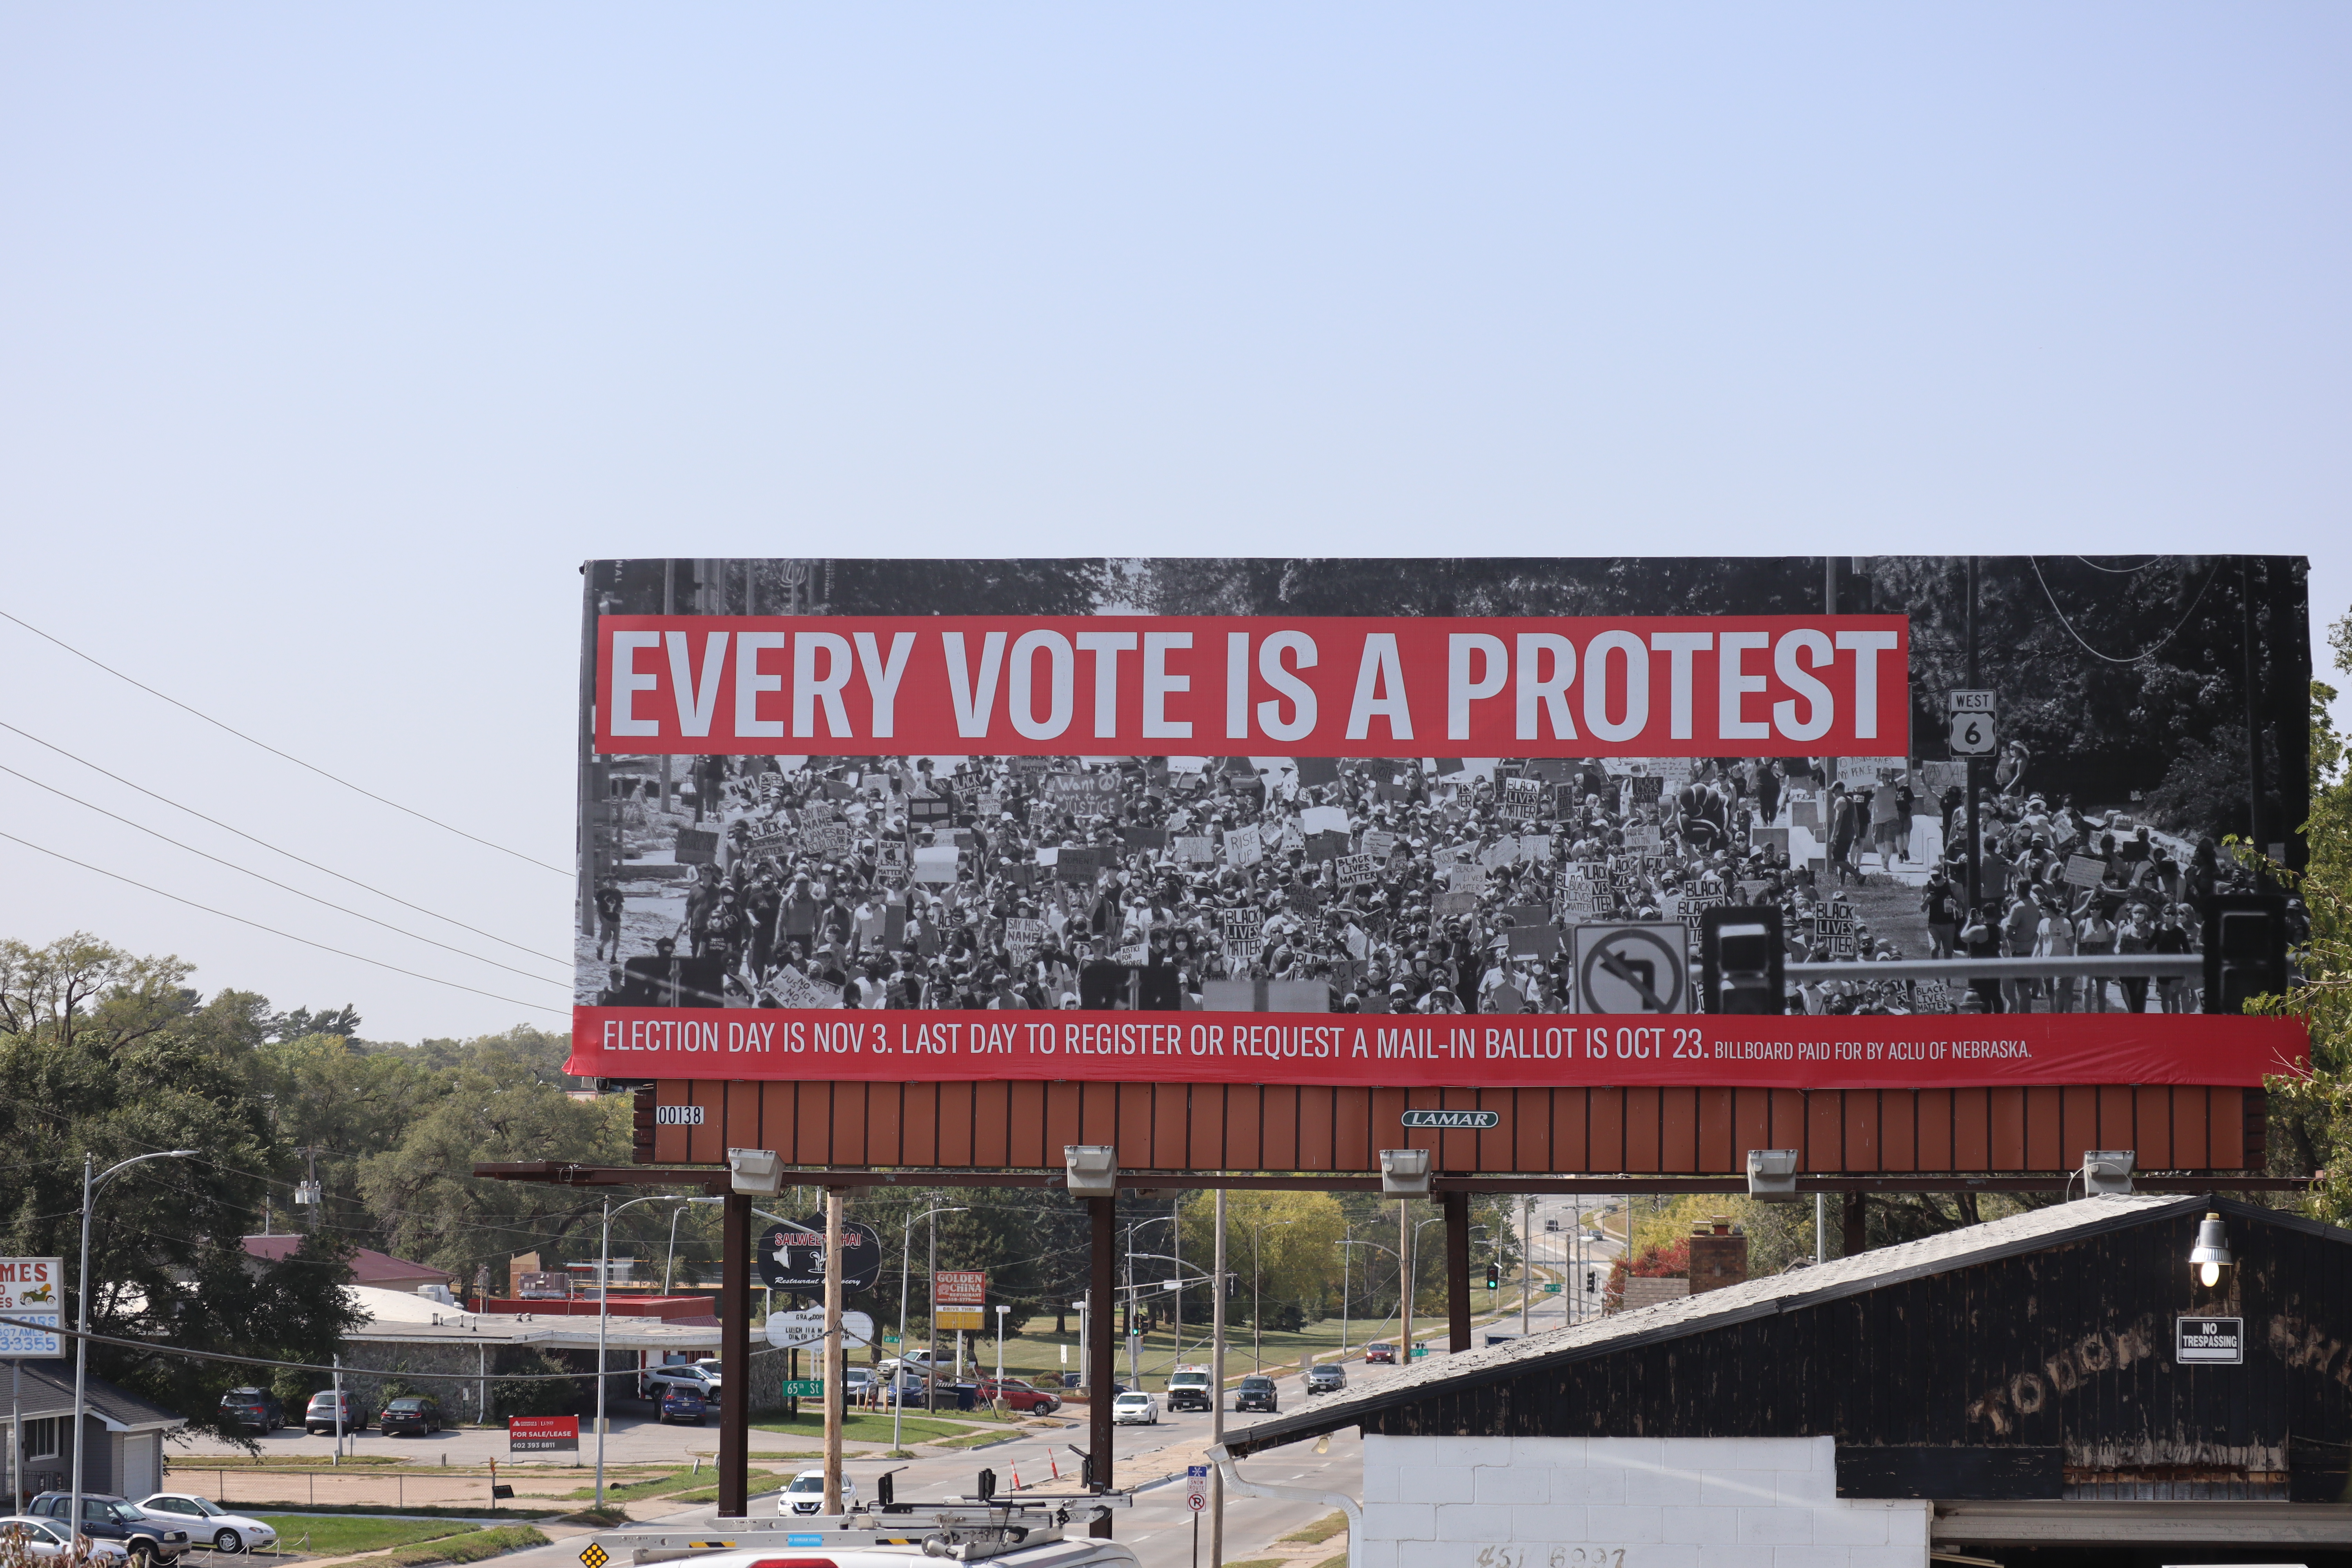 A billboard in Omaha reads "Every Vote is a Protest"